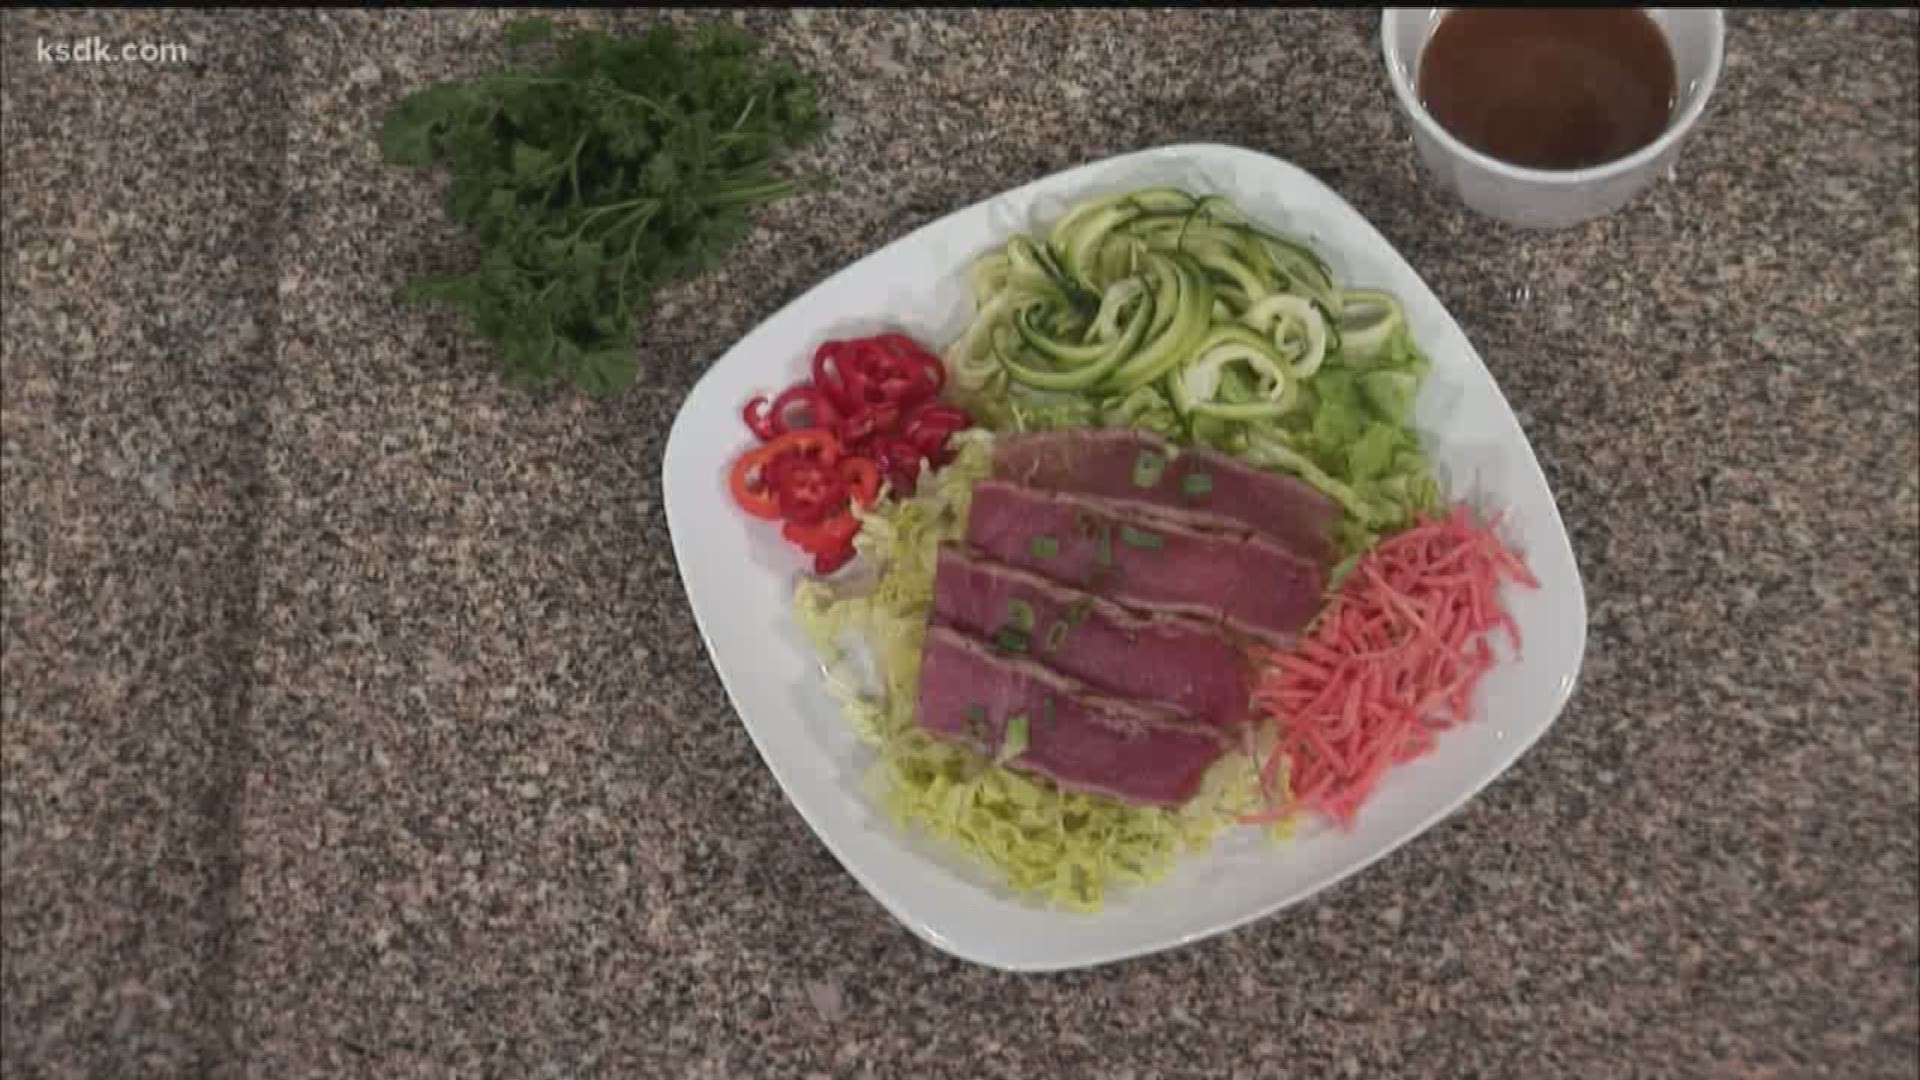 A.J. Moll of Saul Mirowitz Jewish Community School shares a recipe for Ahi Tuna Zoodler.